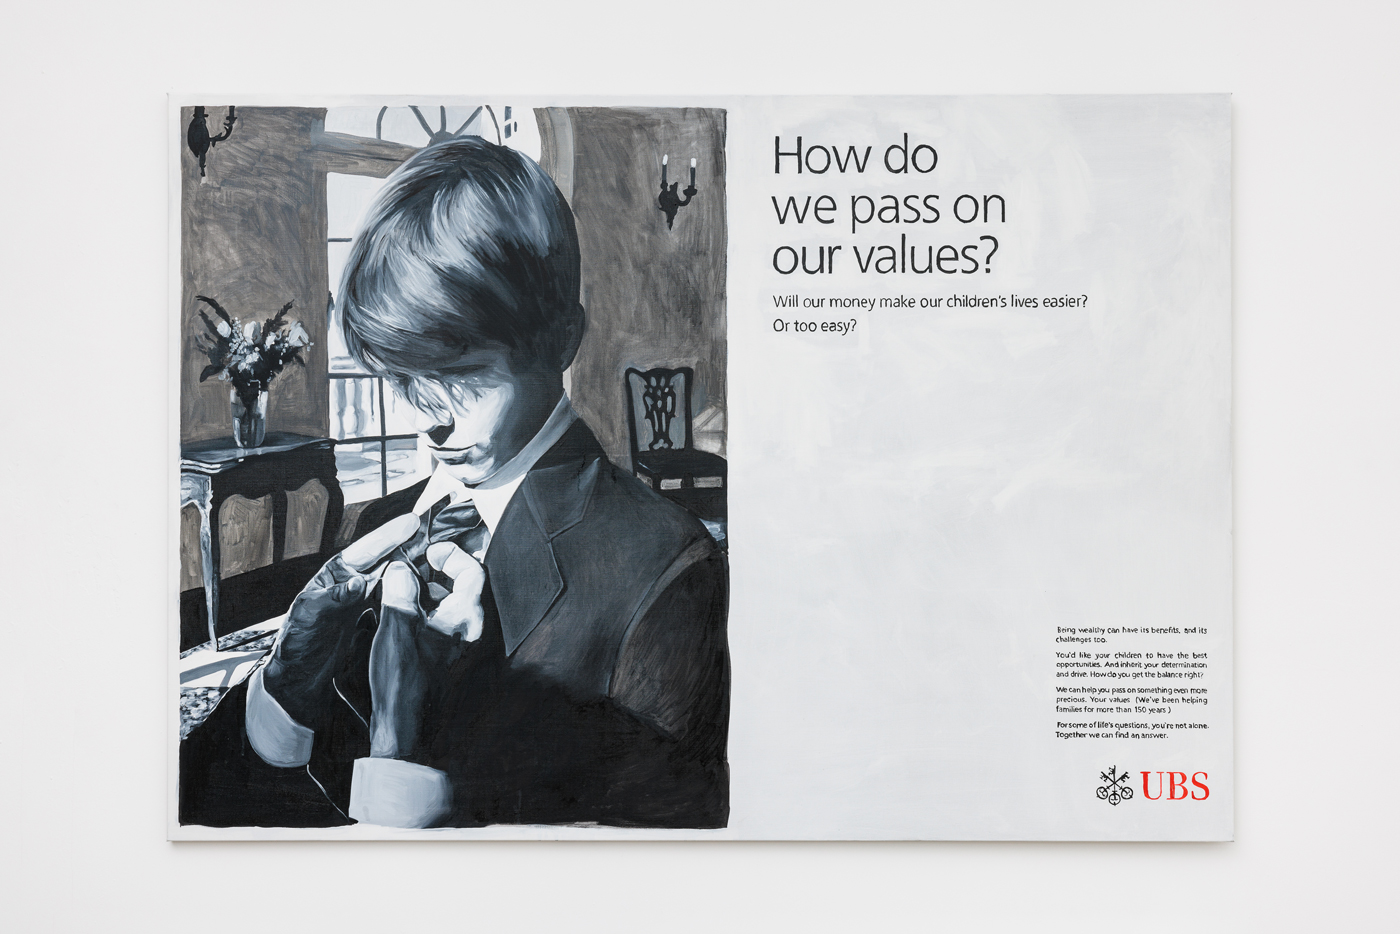 One image shows a man adjusting a young boy's tie. Next to the picture it says "How do we pass on our values? Will our money make our children's lives easier? Or too easy? The UBS logo is shown below.